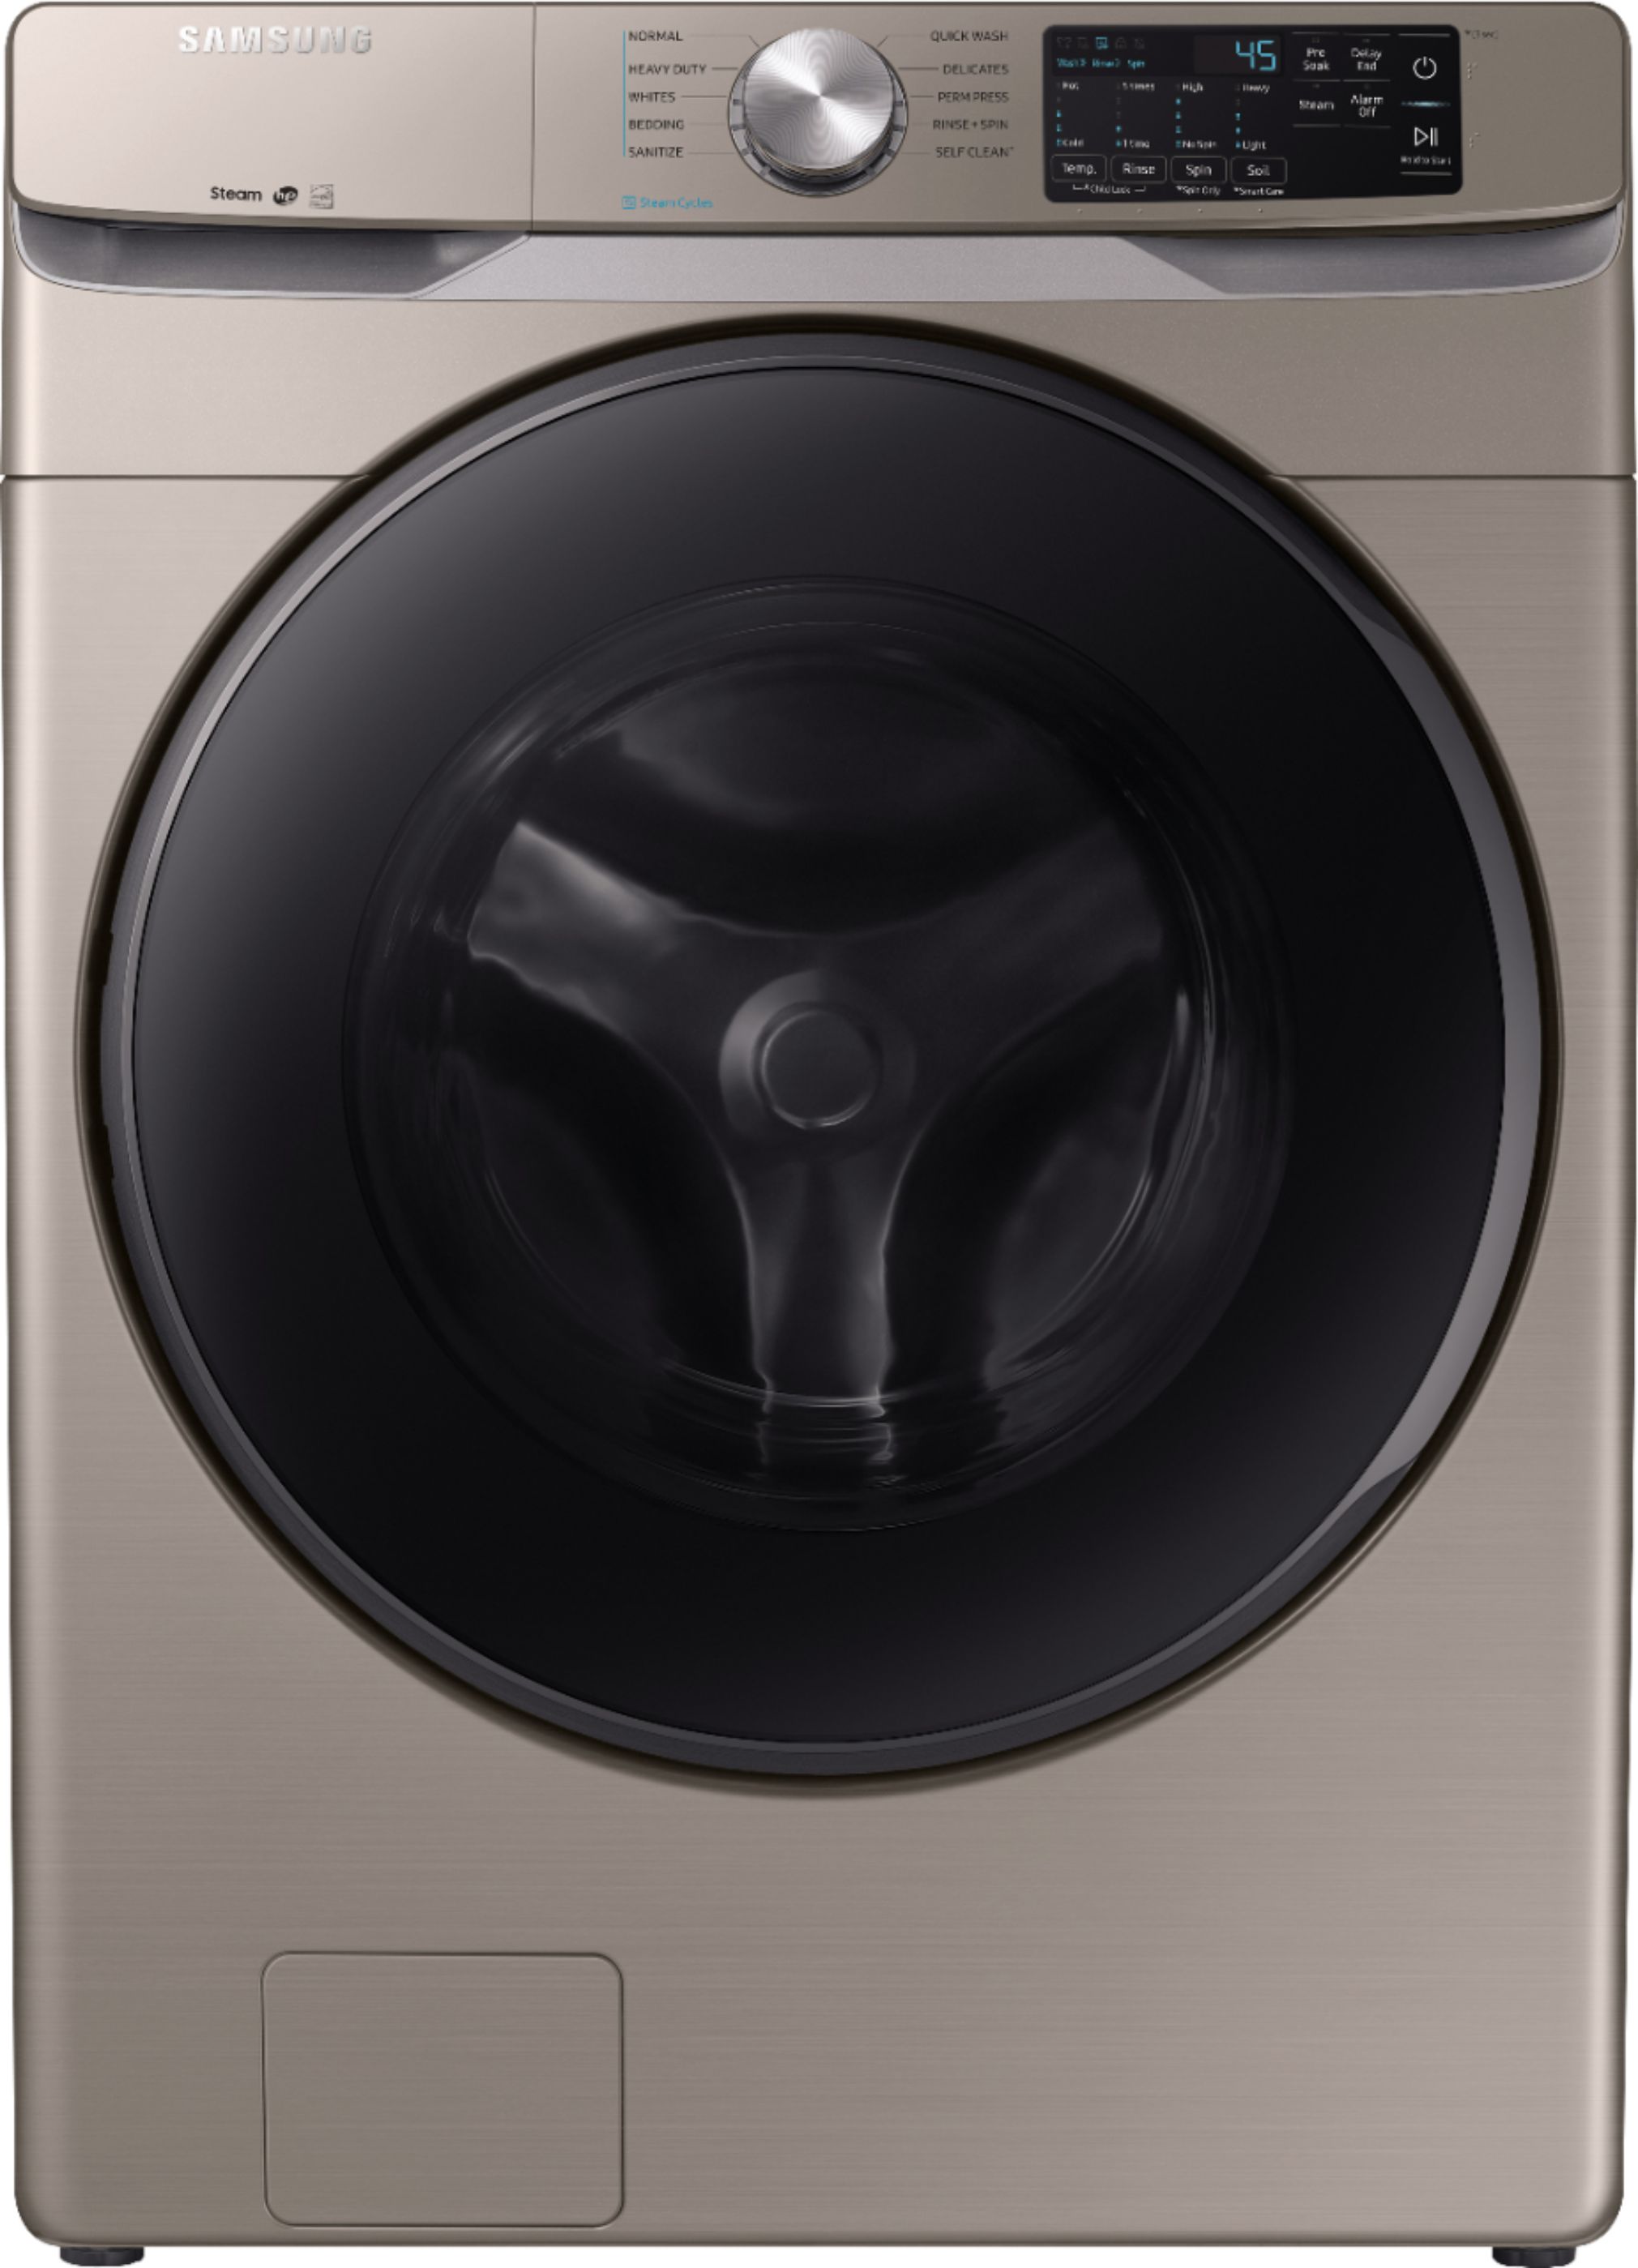 Samsung - 4.5 cu. ft. High Efficiency Stackable Front Load Washer with Steam - Champagne